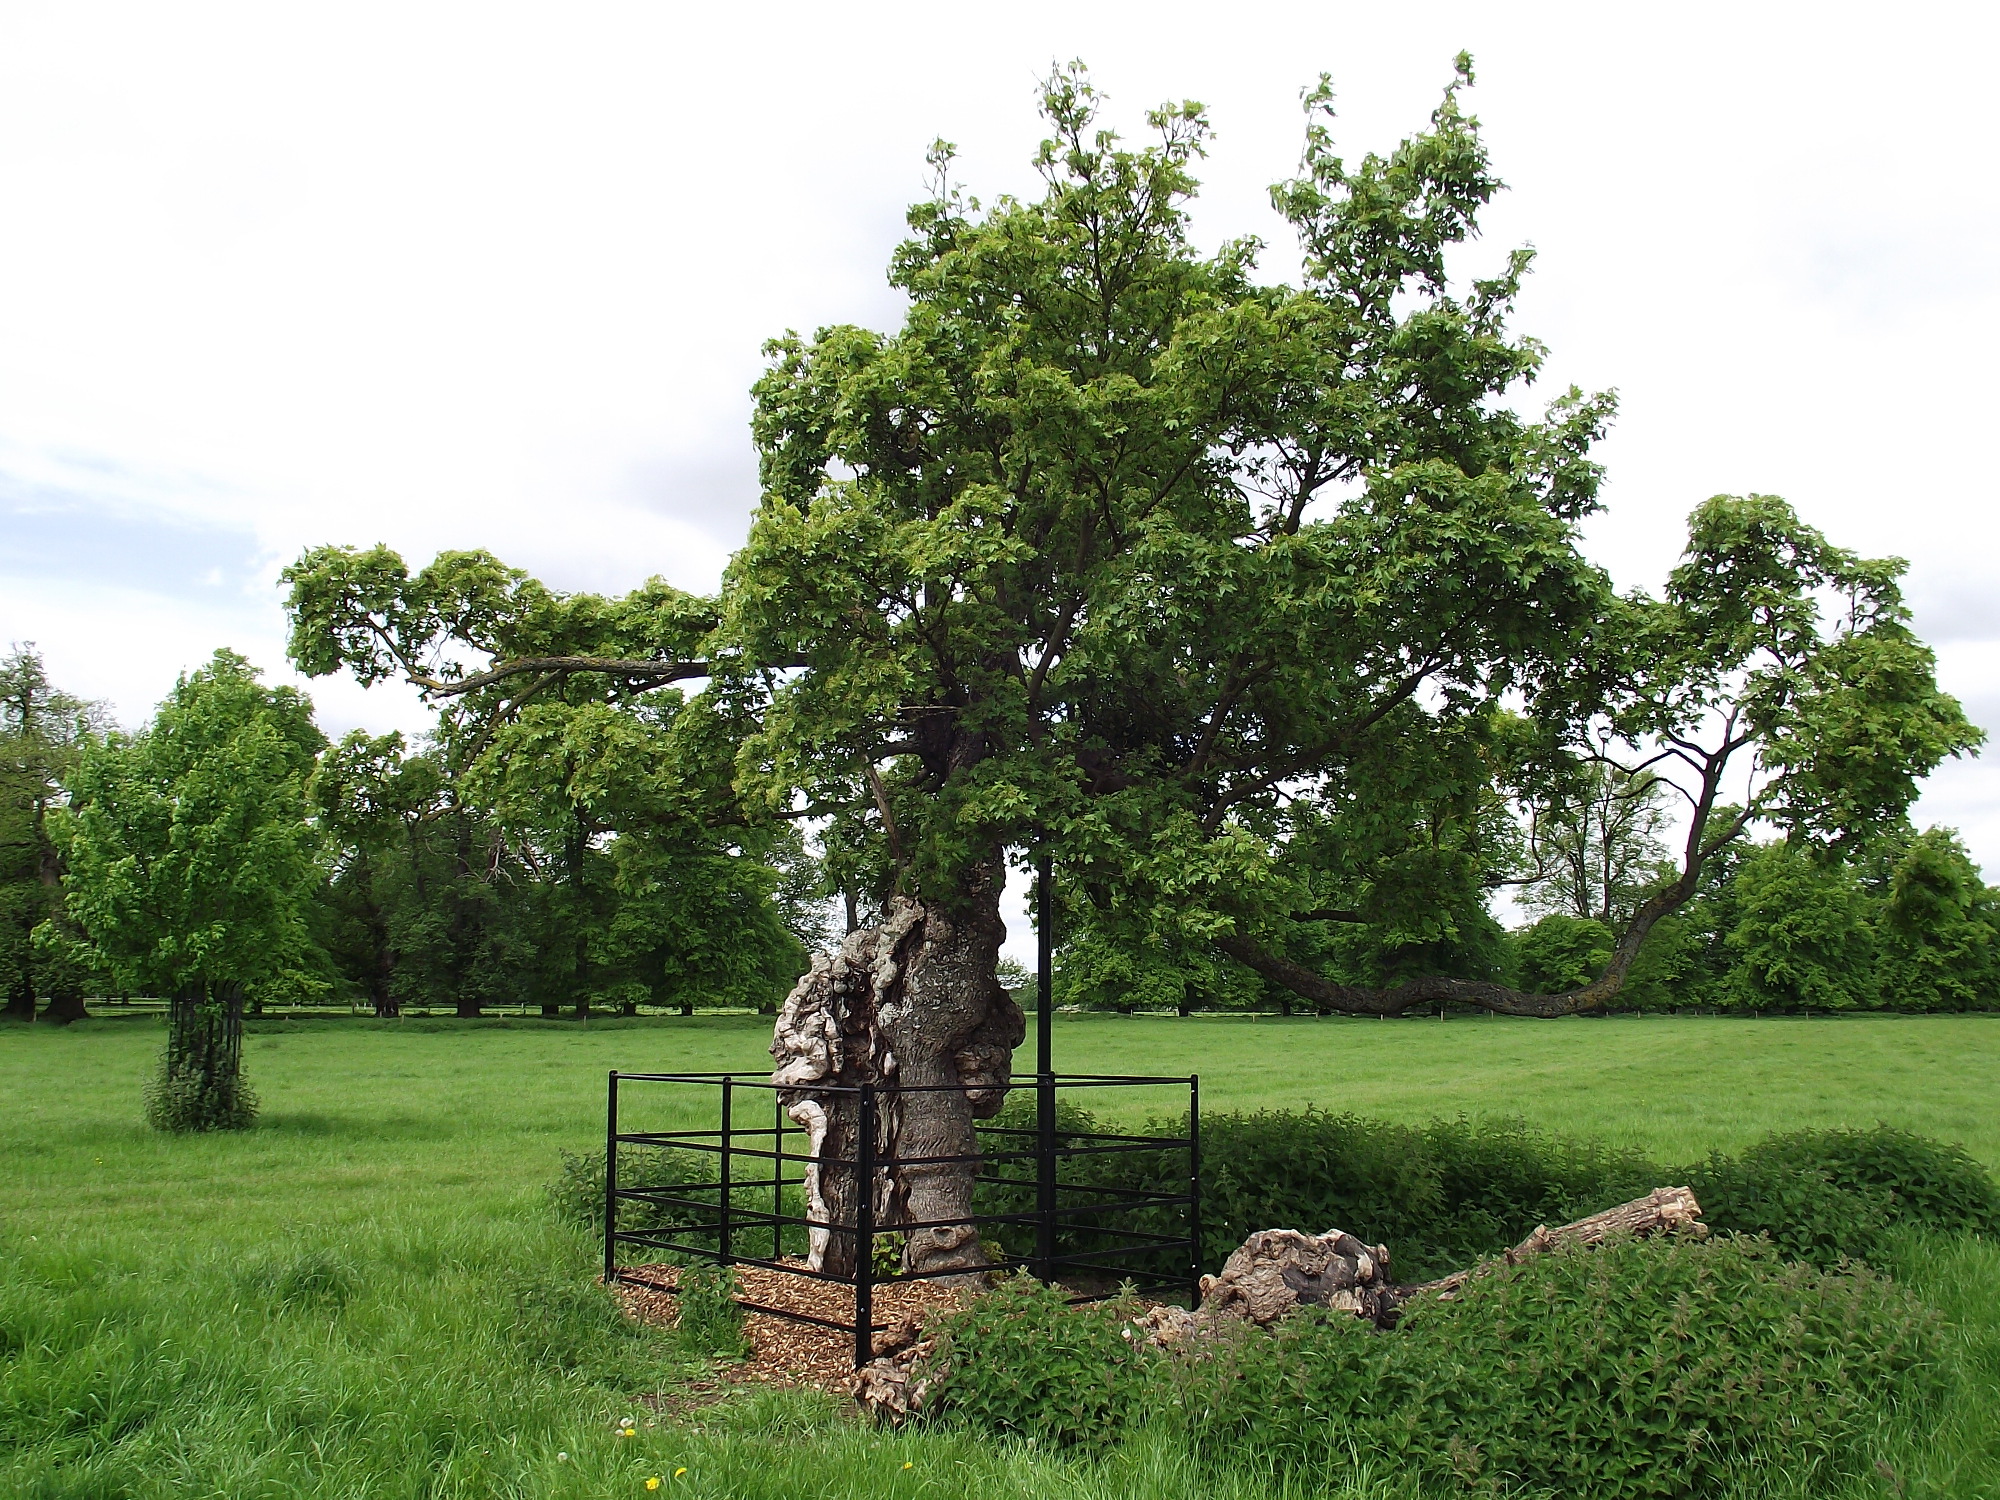 This ancient field maple in Burghley House, Cambridgeshire clearly shows ancient characteristics such as a hollowing trunk. (Photo: Kylie Harrison Mellor)